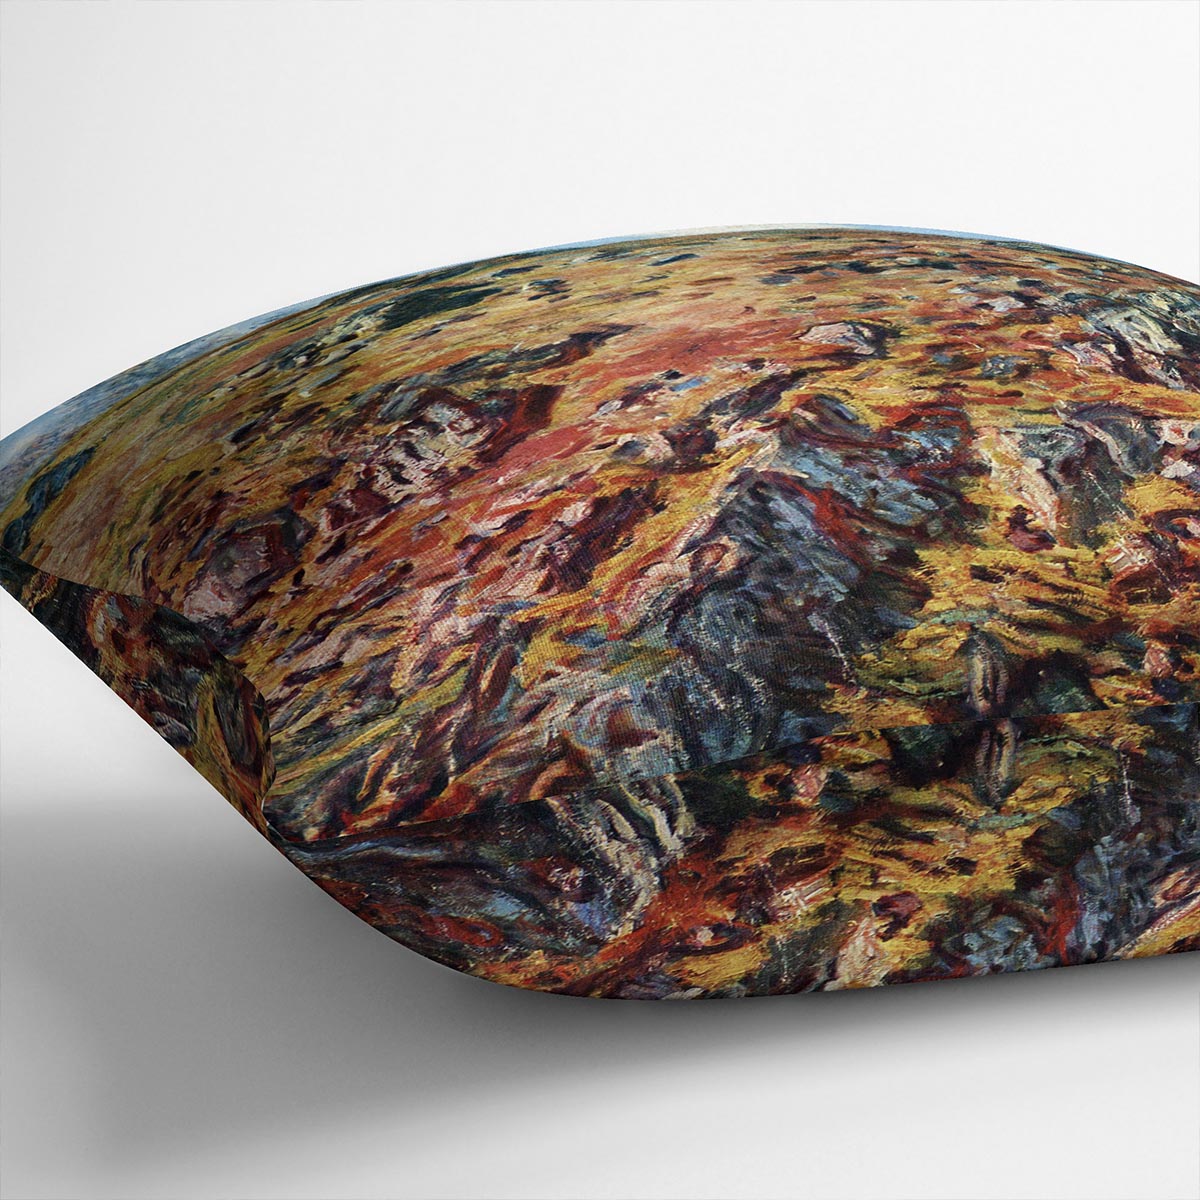 The boulder by Monet Cushion